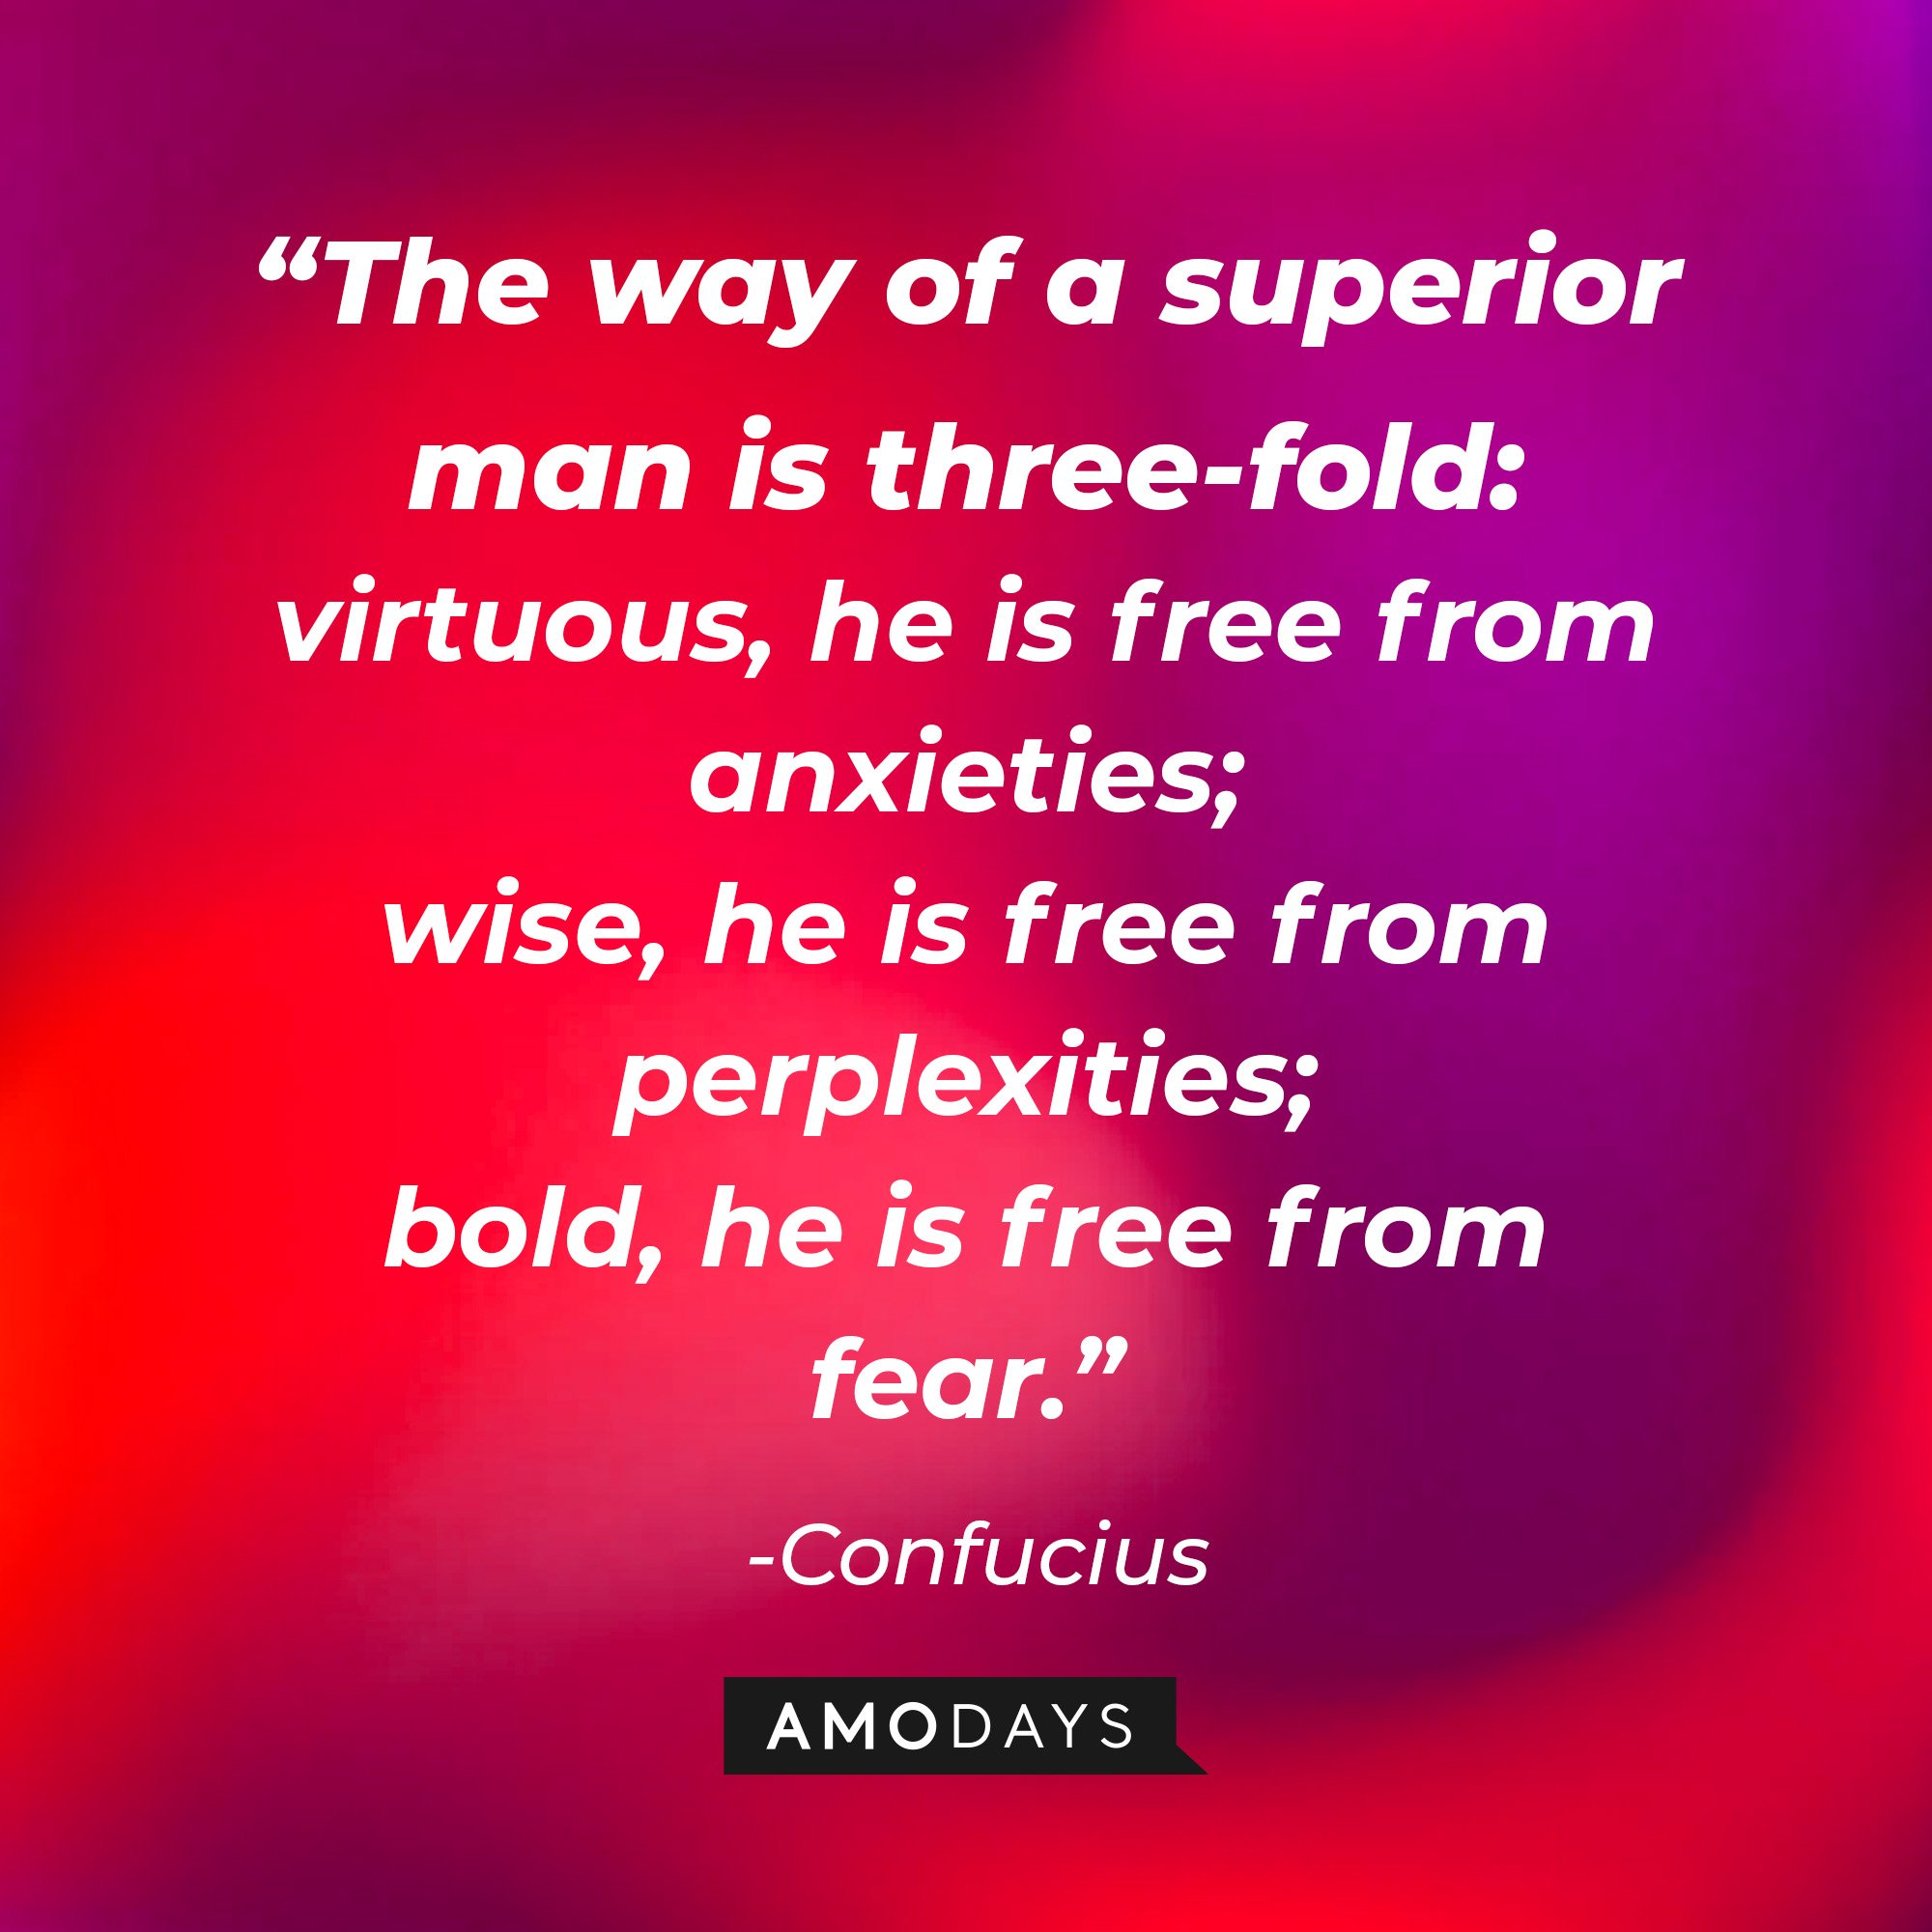 Confucius's quote: “The way of a superior man is three-fold: virtuous, he is free from anxieties; wise, he is free from perplexities; bold, he is free from fear.” | Image: AmoDays